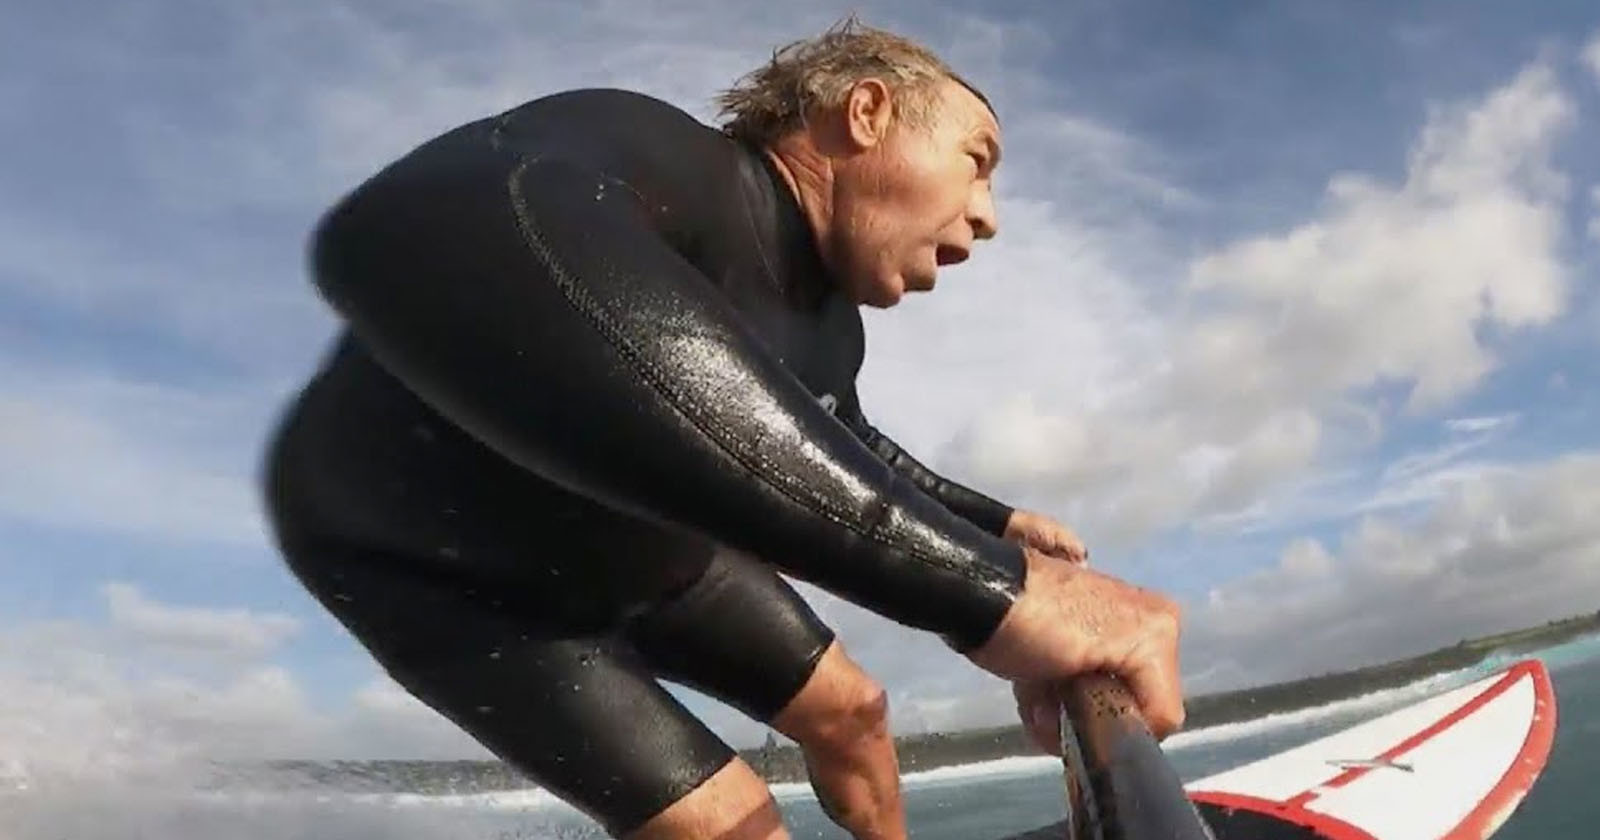 Legendary Surf Photographer Captures His Final Moments Before Collapsing